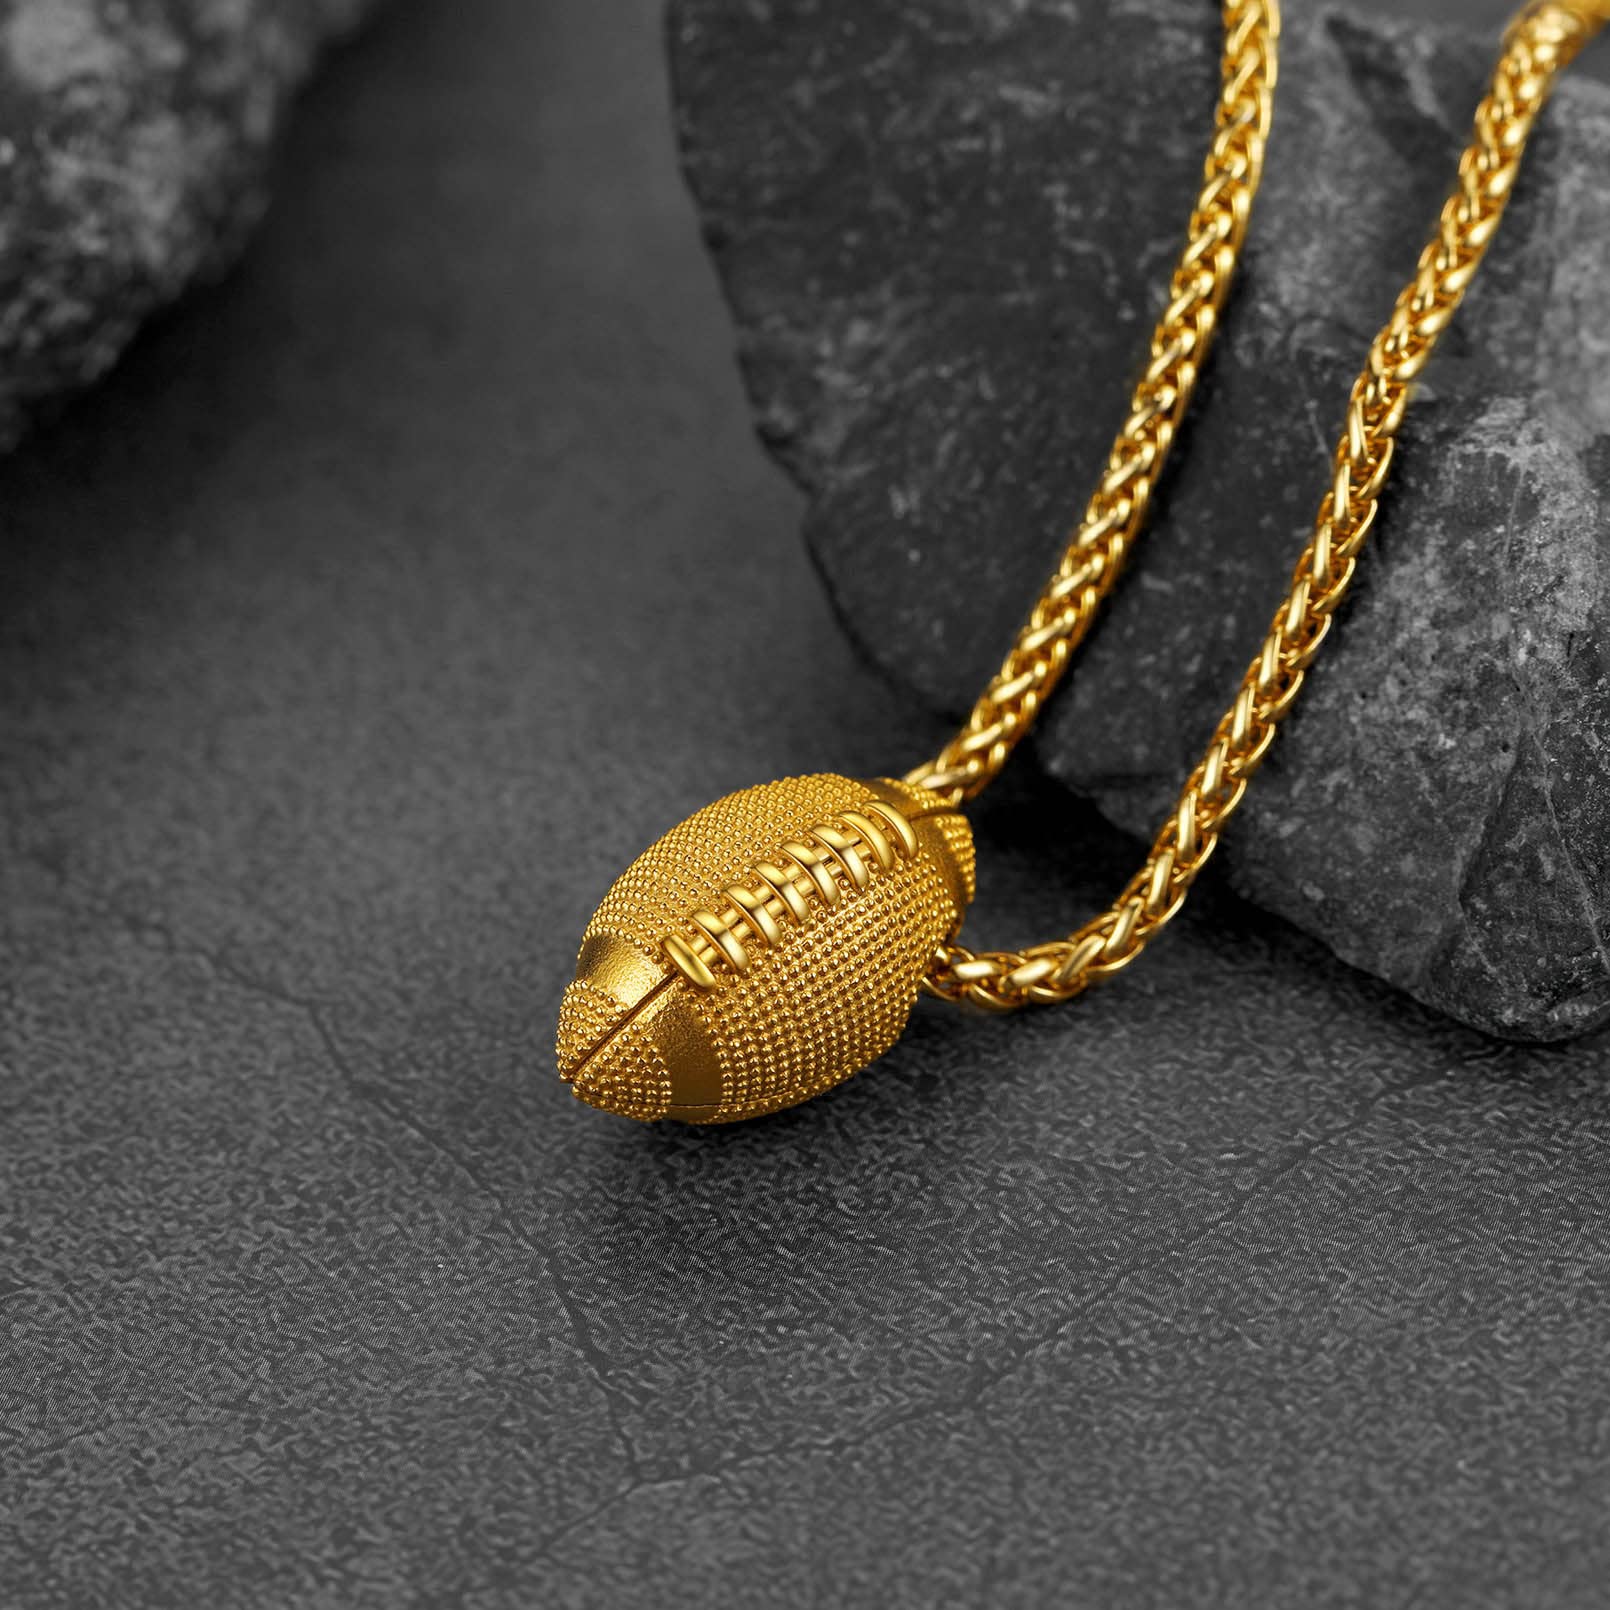 FaithHeart Sports Necklace for Men Women, Stainless Steel Gold Plated 3D Football/Soccer/Basketball/Volleyball Pendant Jewelry with Delicate Gift Packaging